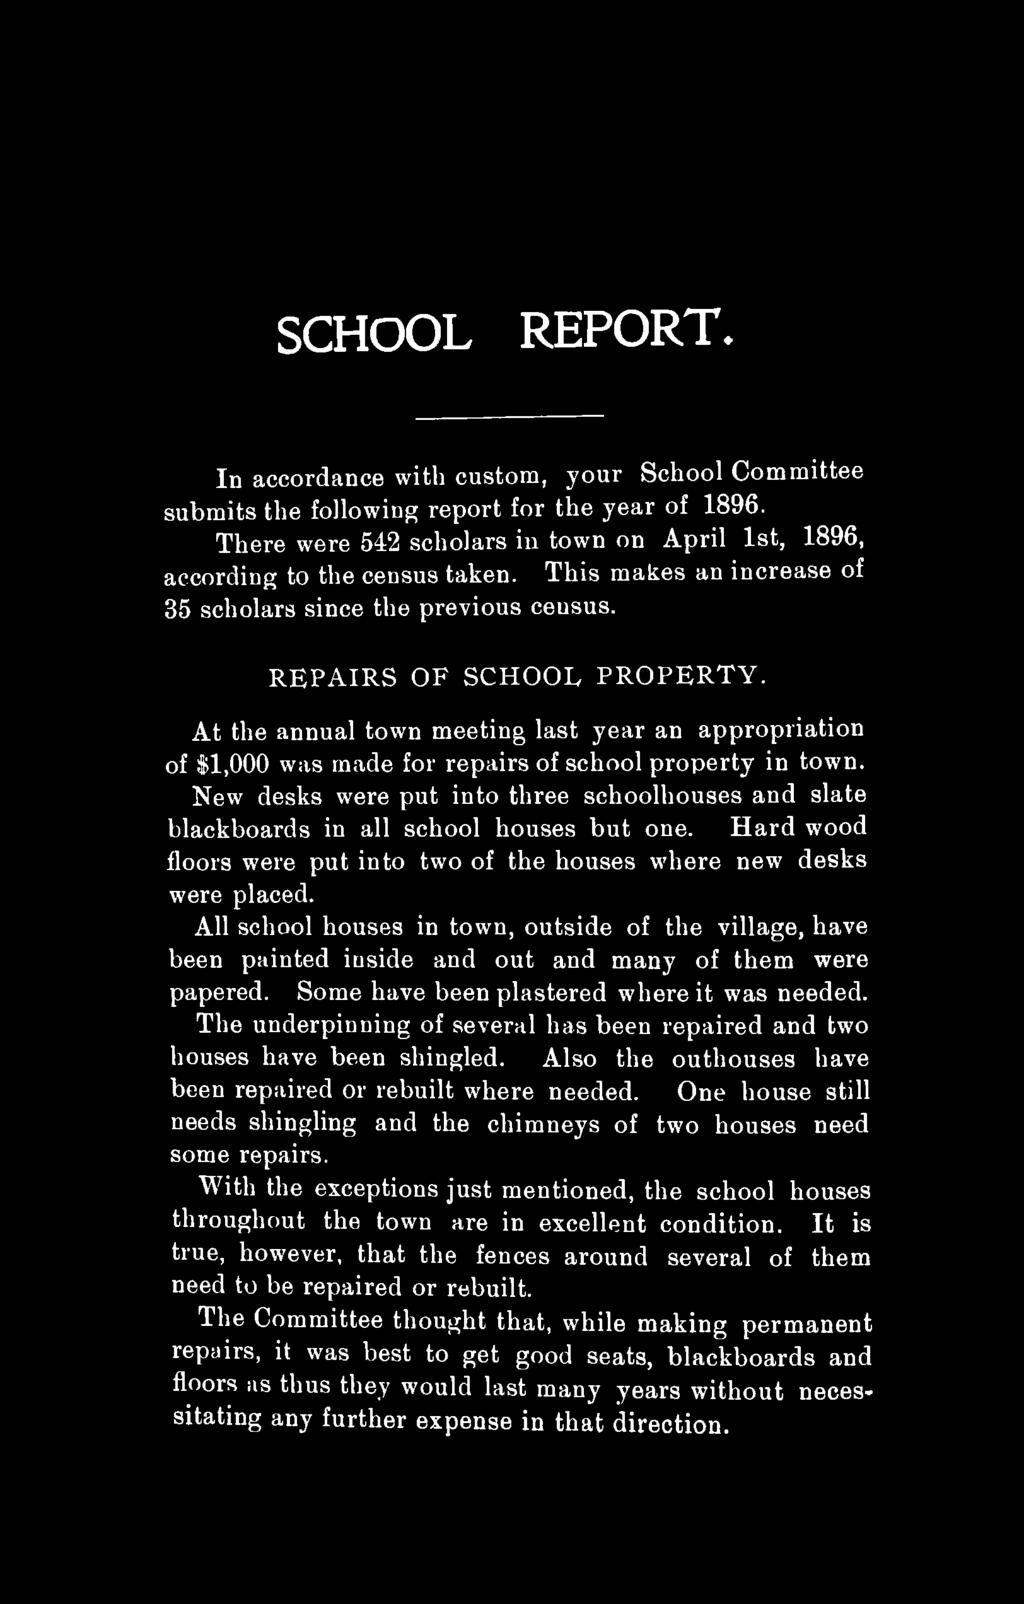 SCHOOL REPORT* In accordance with custom, your School Committee submits the following report for the year of 1896. There were 542 scholars in town on April 1st, 1896, according to the census taken.